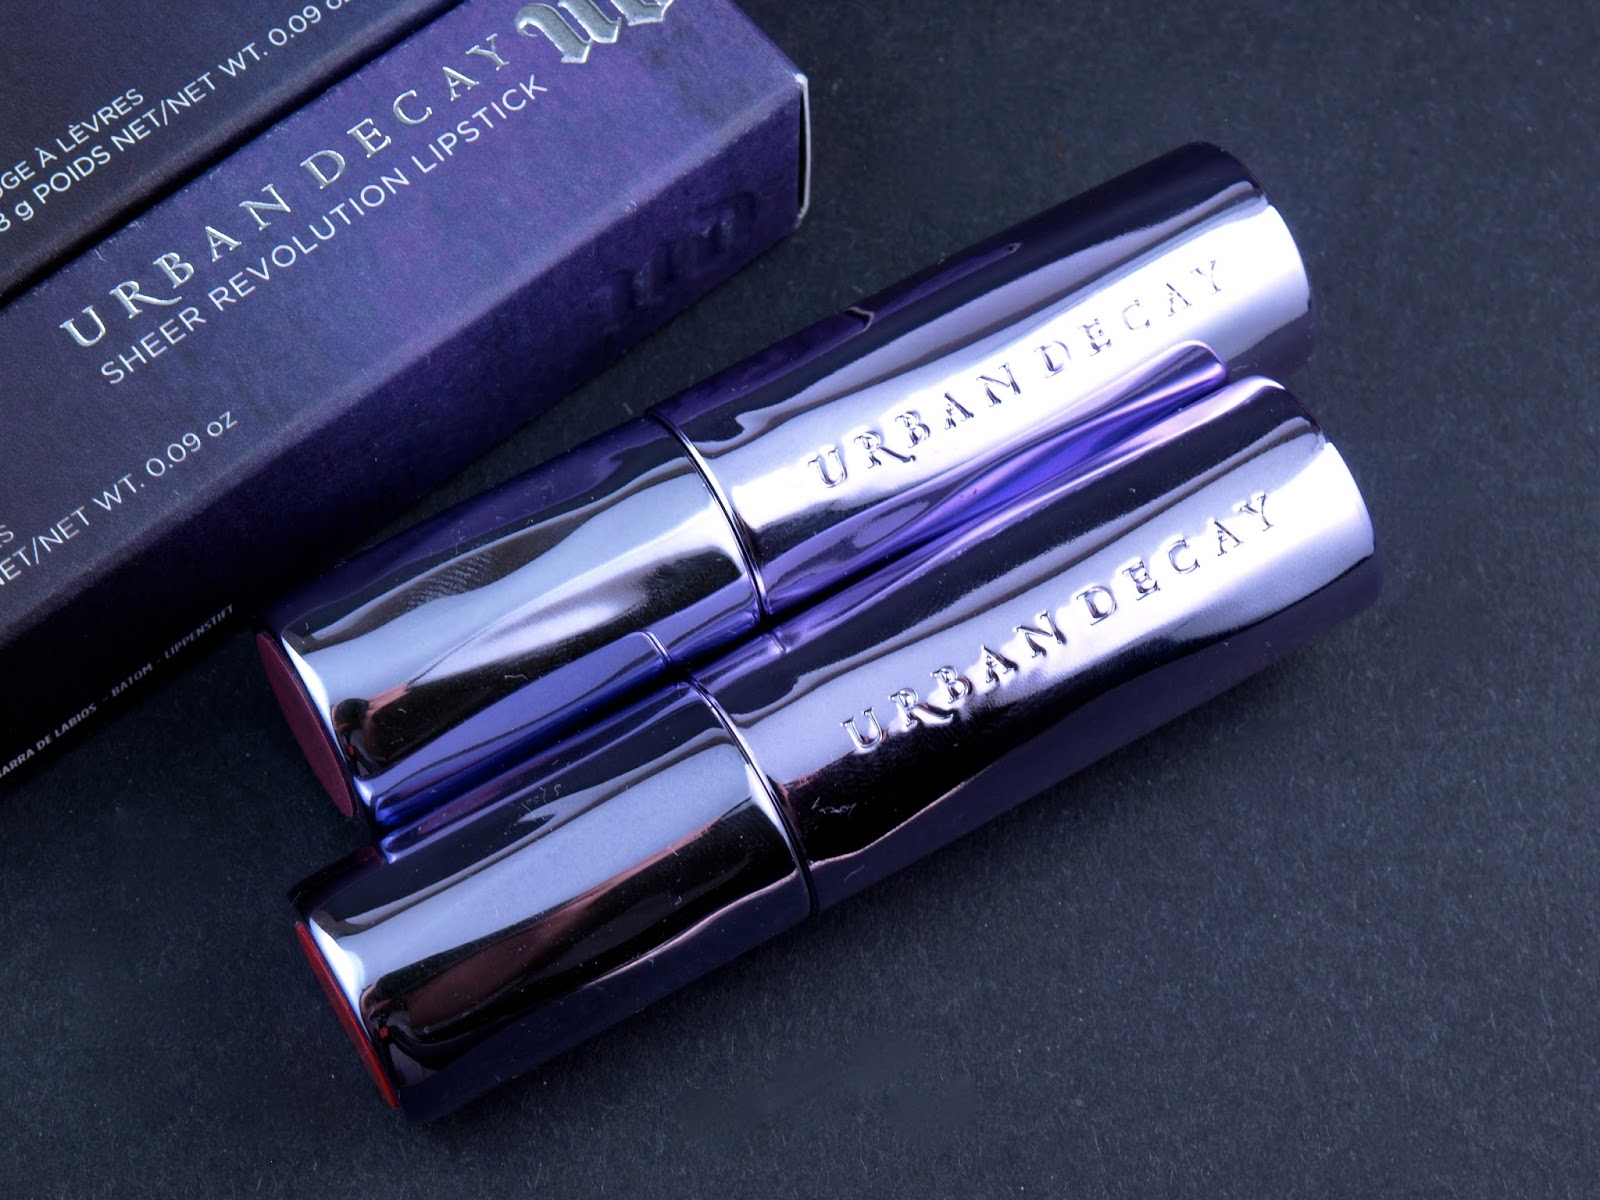 Urban Decay Sheer Revolution Lipstick in "Slowburn" & "Ladyflower": Review and Swatches